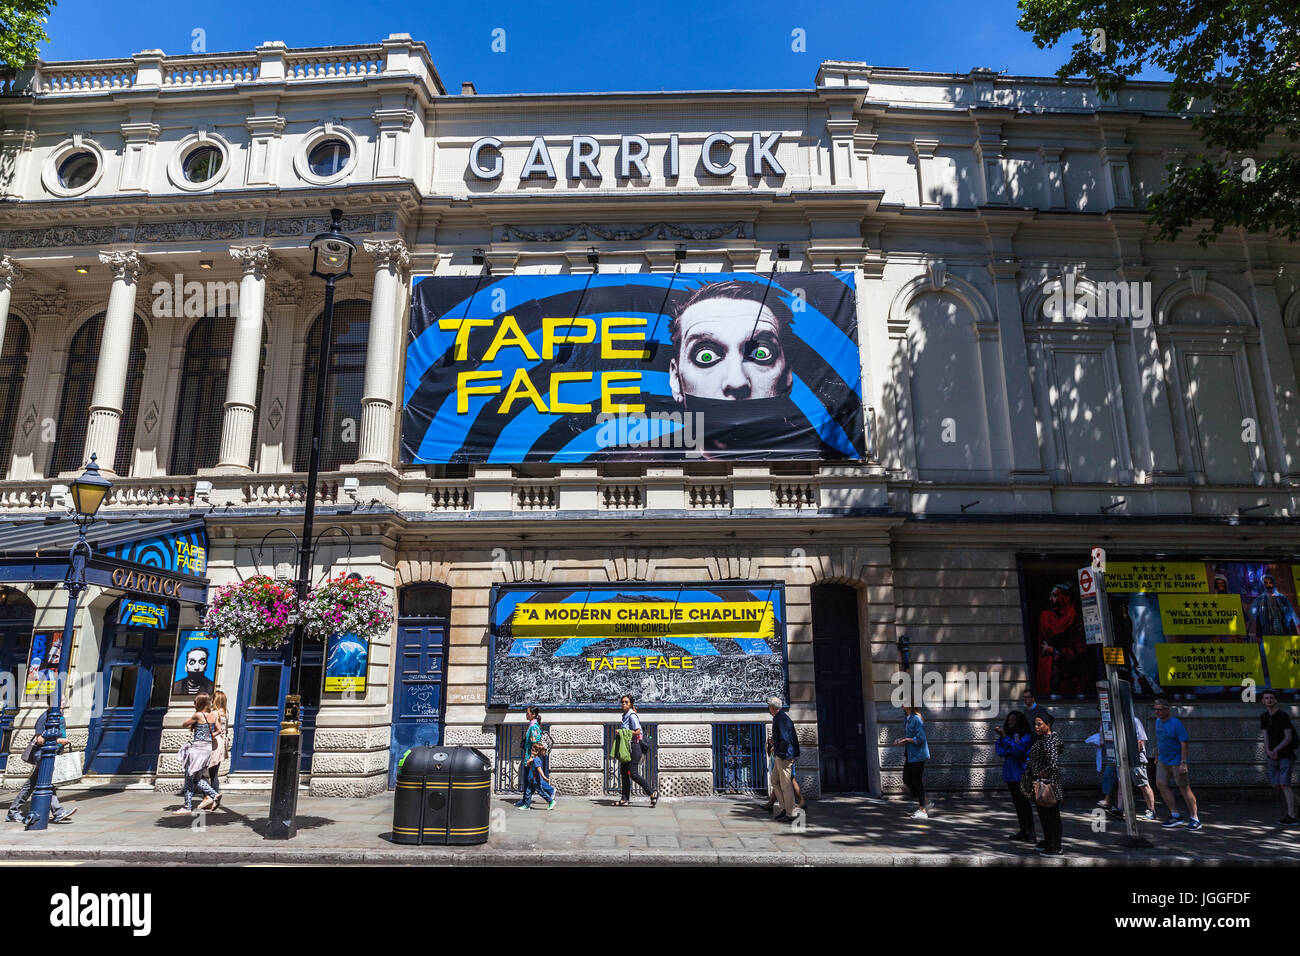 A Tape Face billboard at The Garrick Theatre, Charing Cross Road, West End, London, WC2, England, UK. Stock Photo